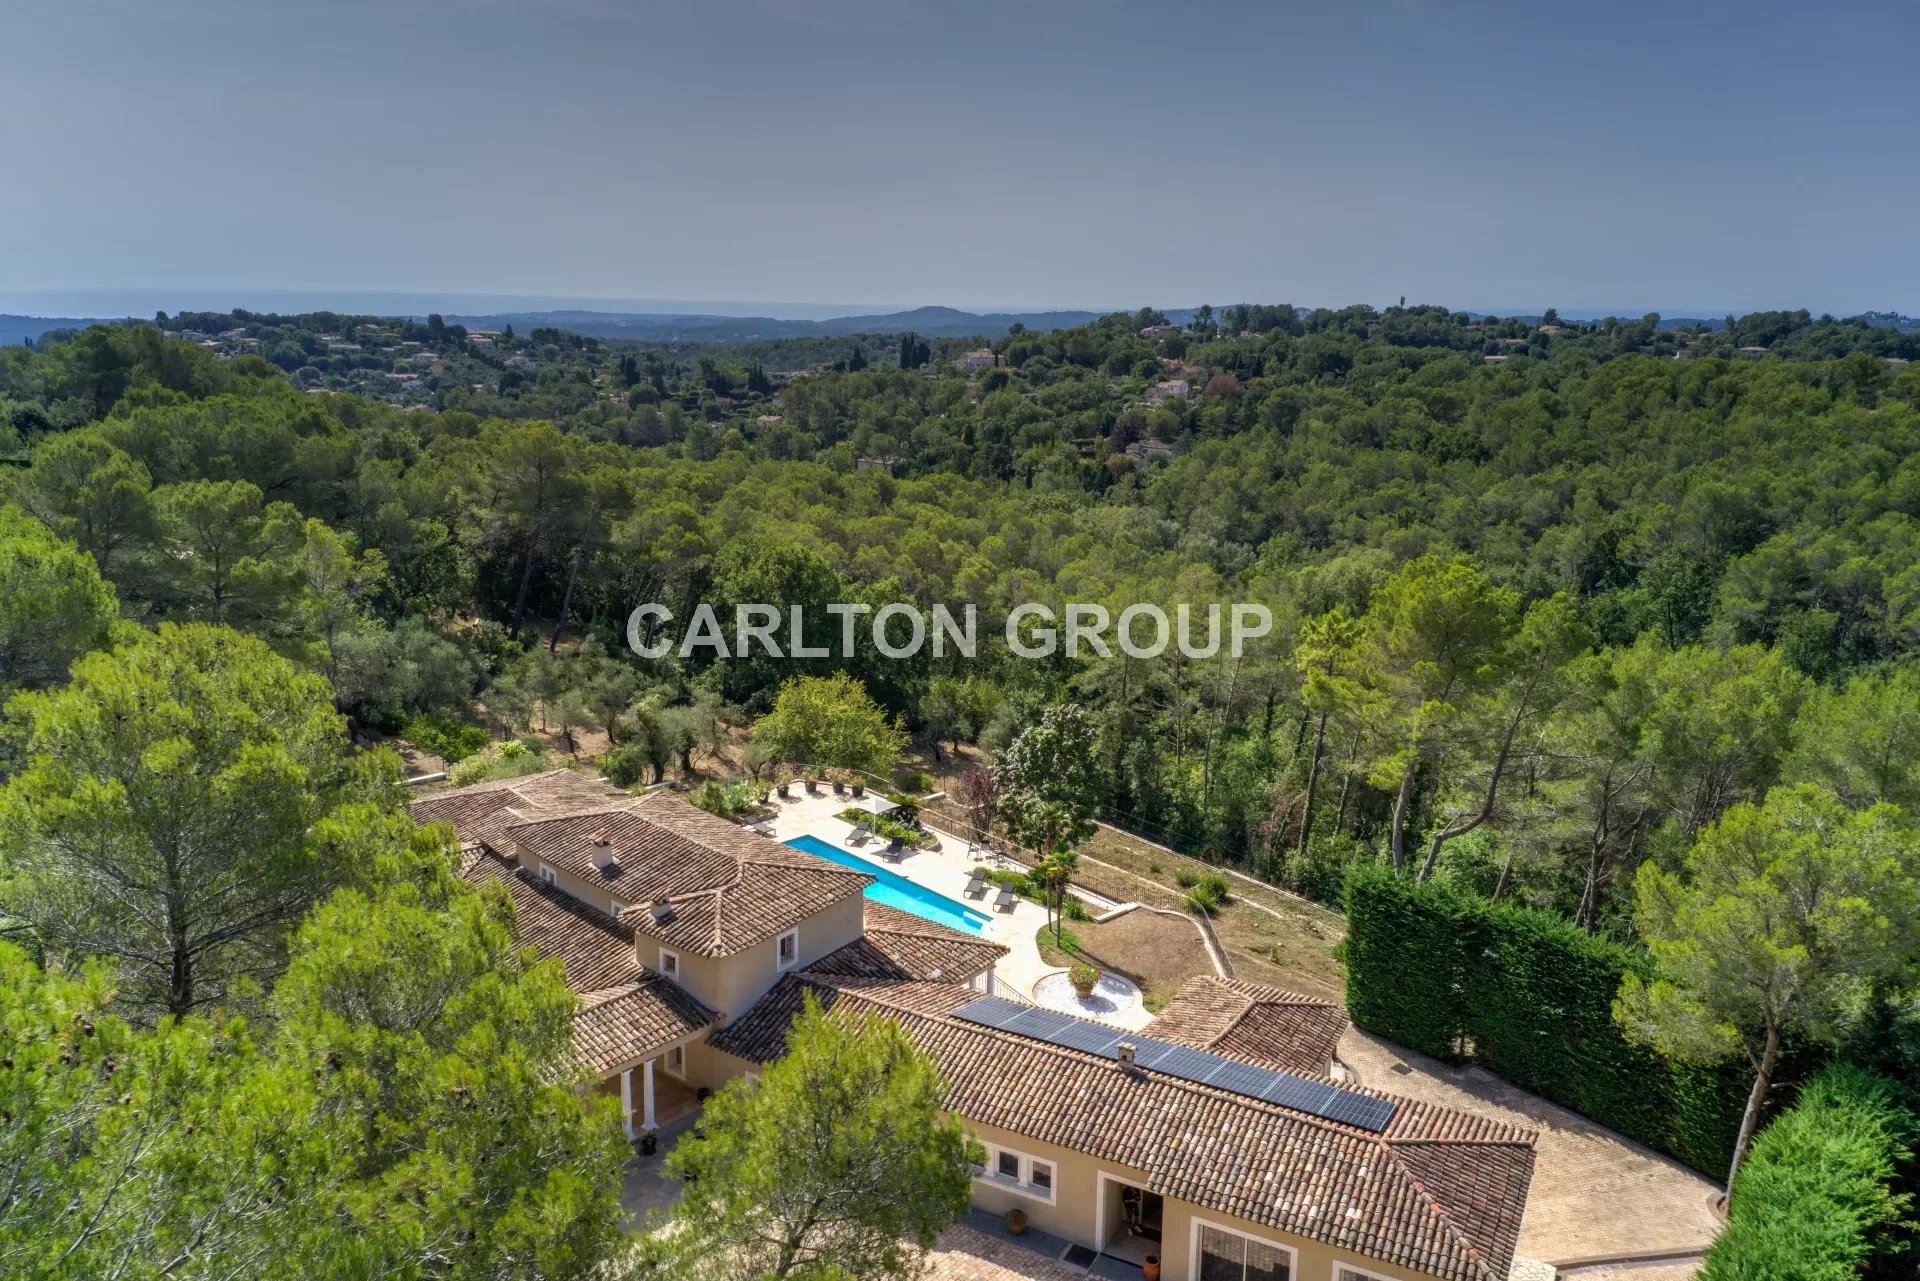 A Glamorously Modern Villa Found In The Provencal Countryside Near Cannes